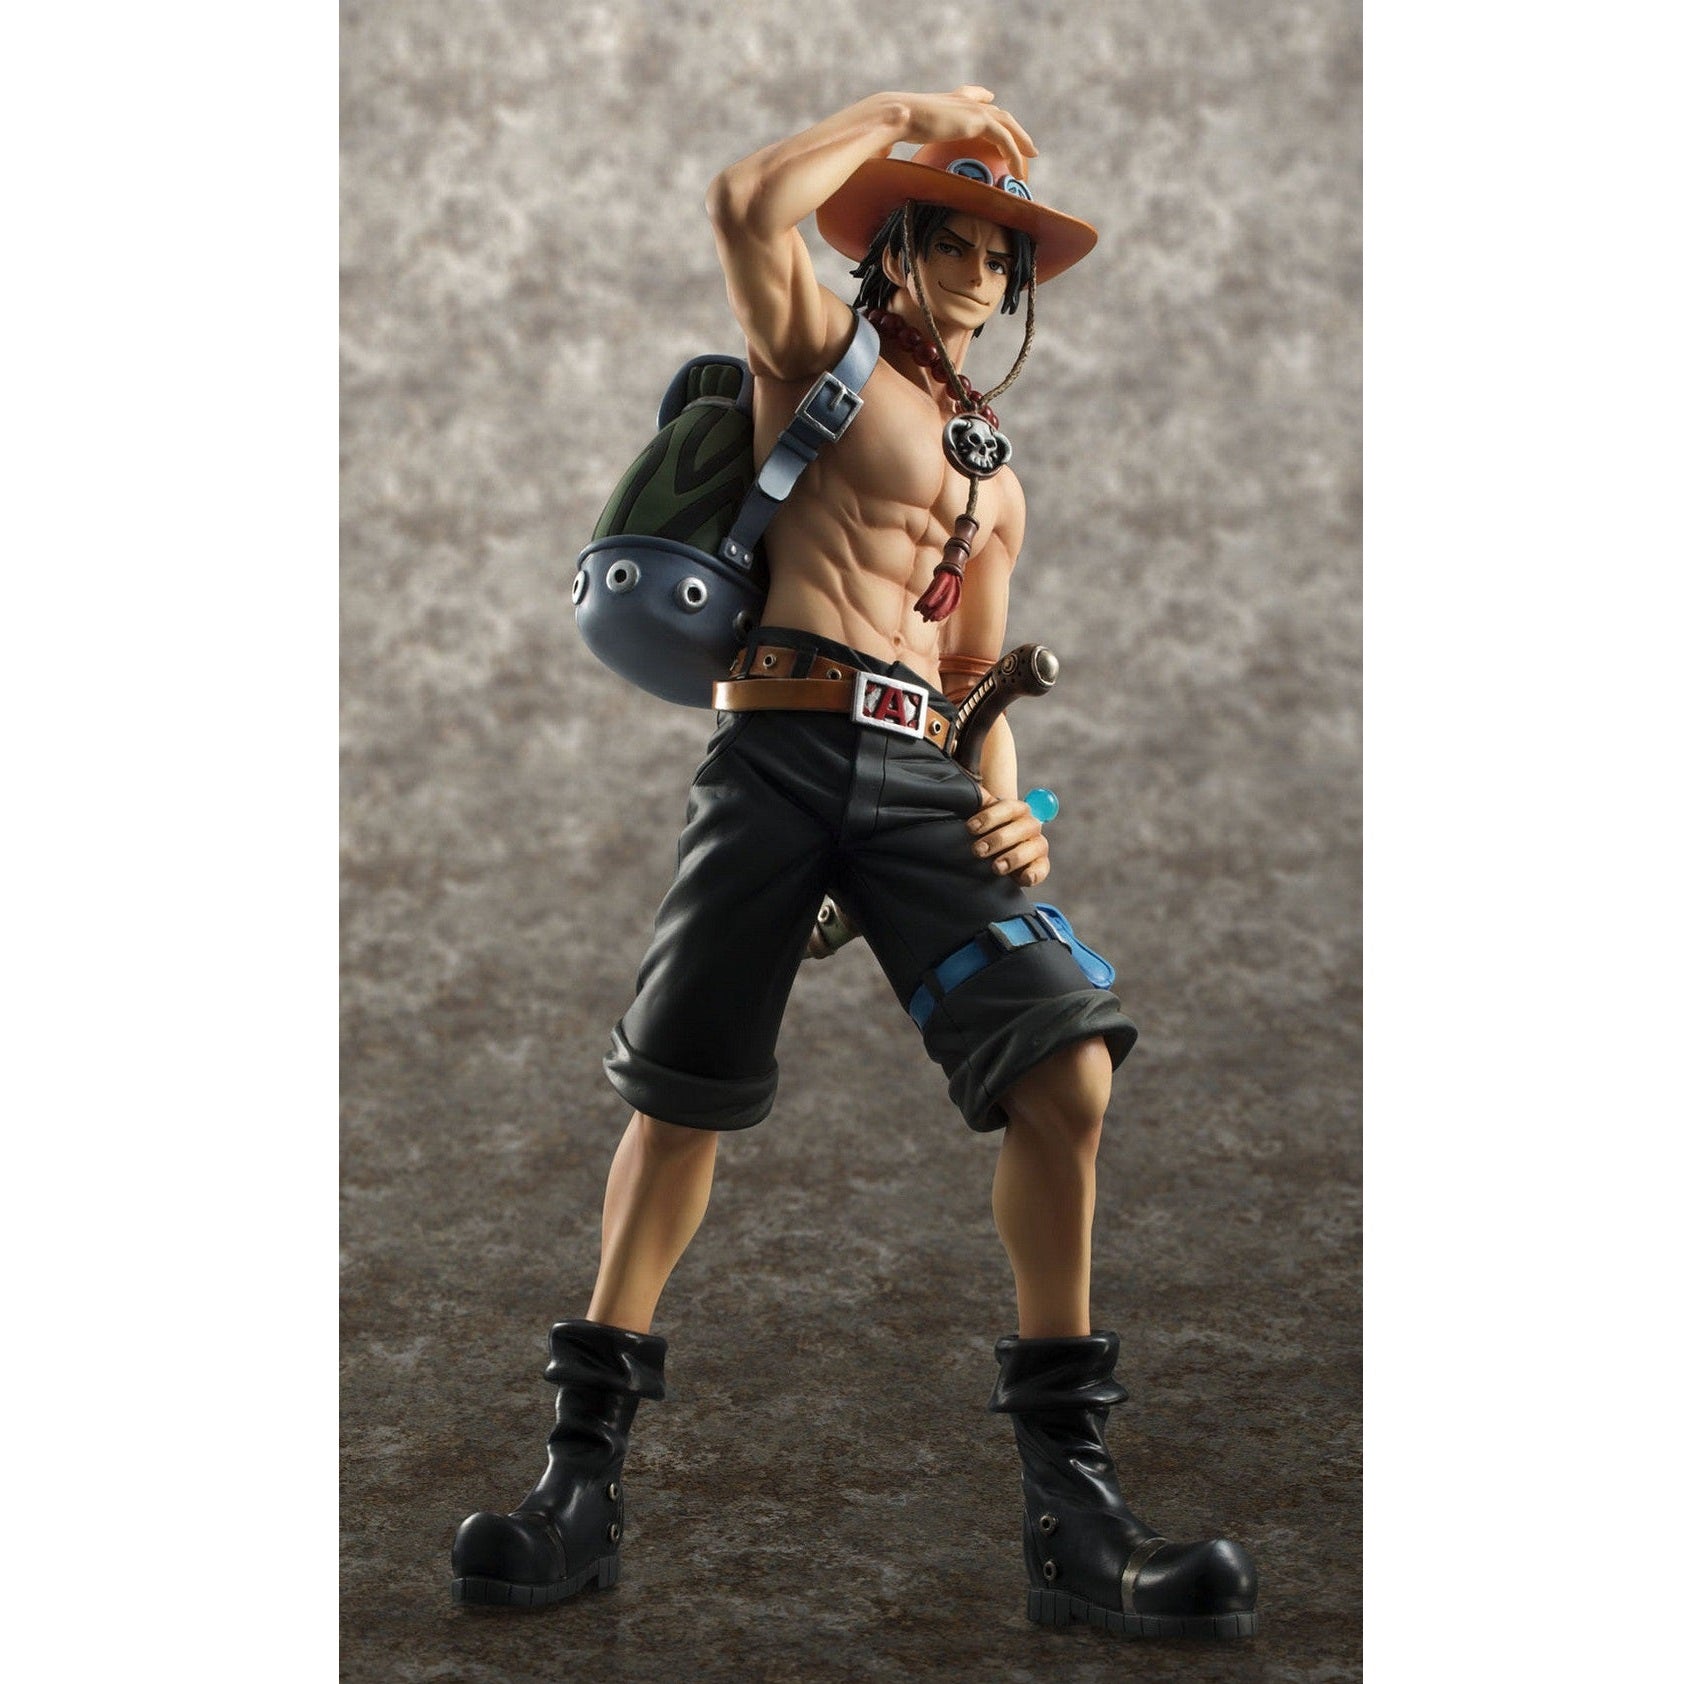 One Piece Neo-DX ~Portrait.Of.Pirates~ "Portgas D. Ace" 10th Limited Ver. (Repeat)-MegaHouse-Ace Cards & Collectibles